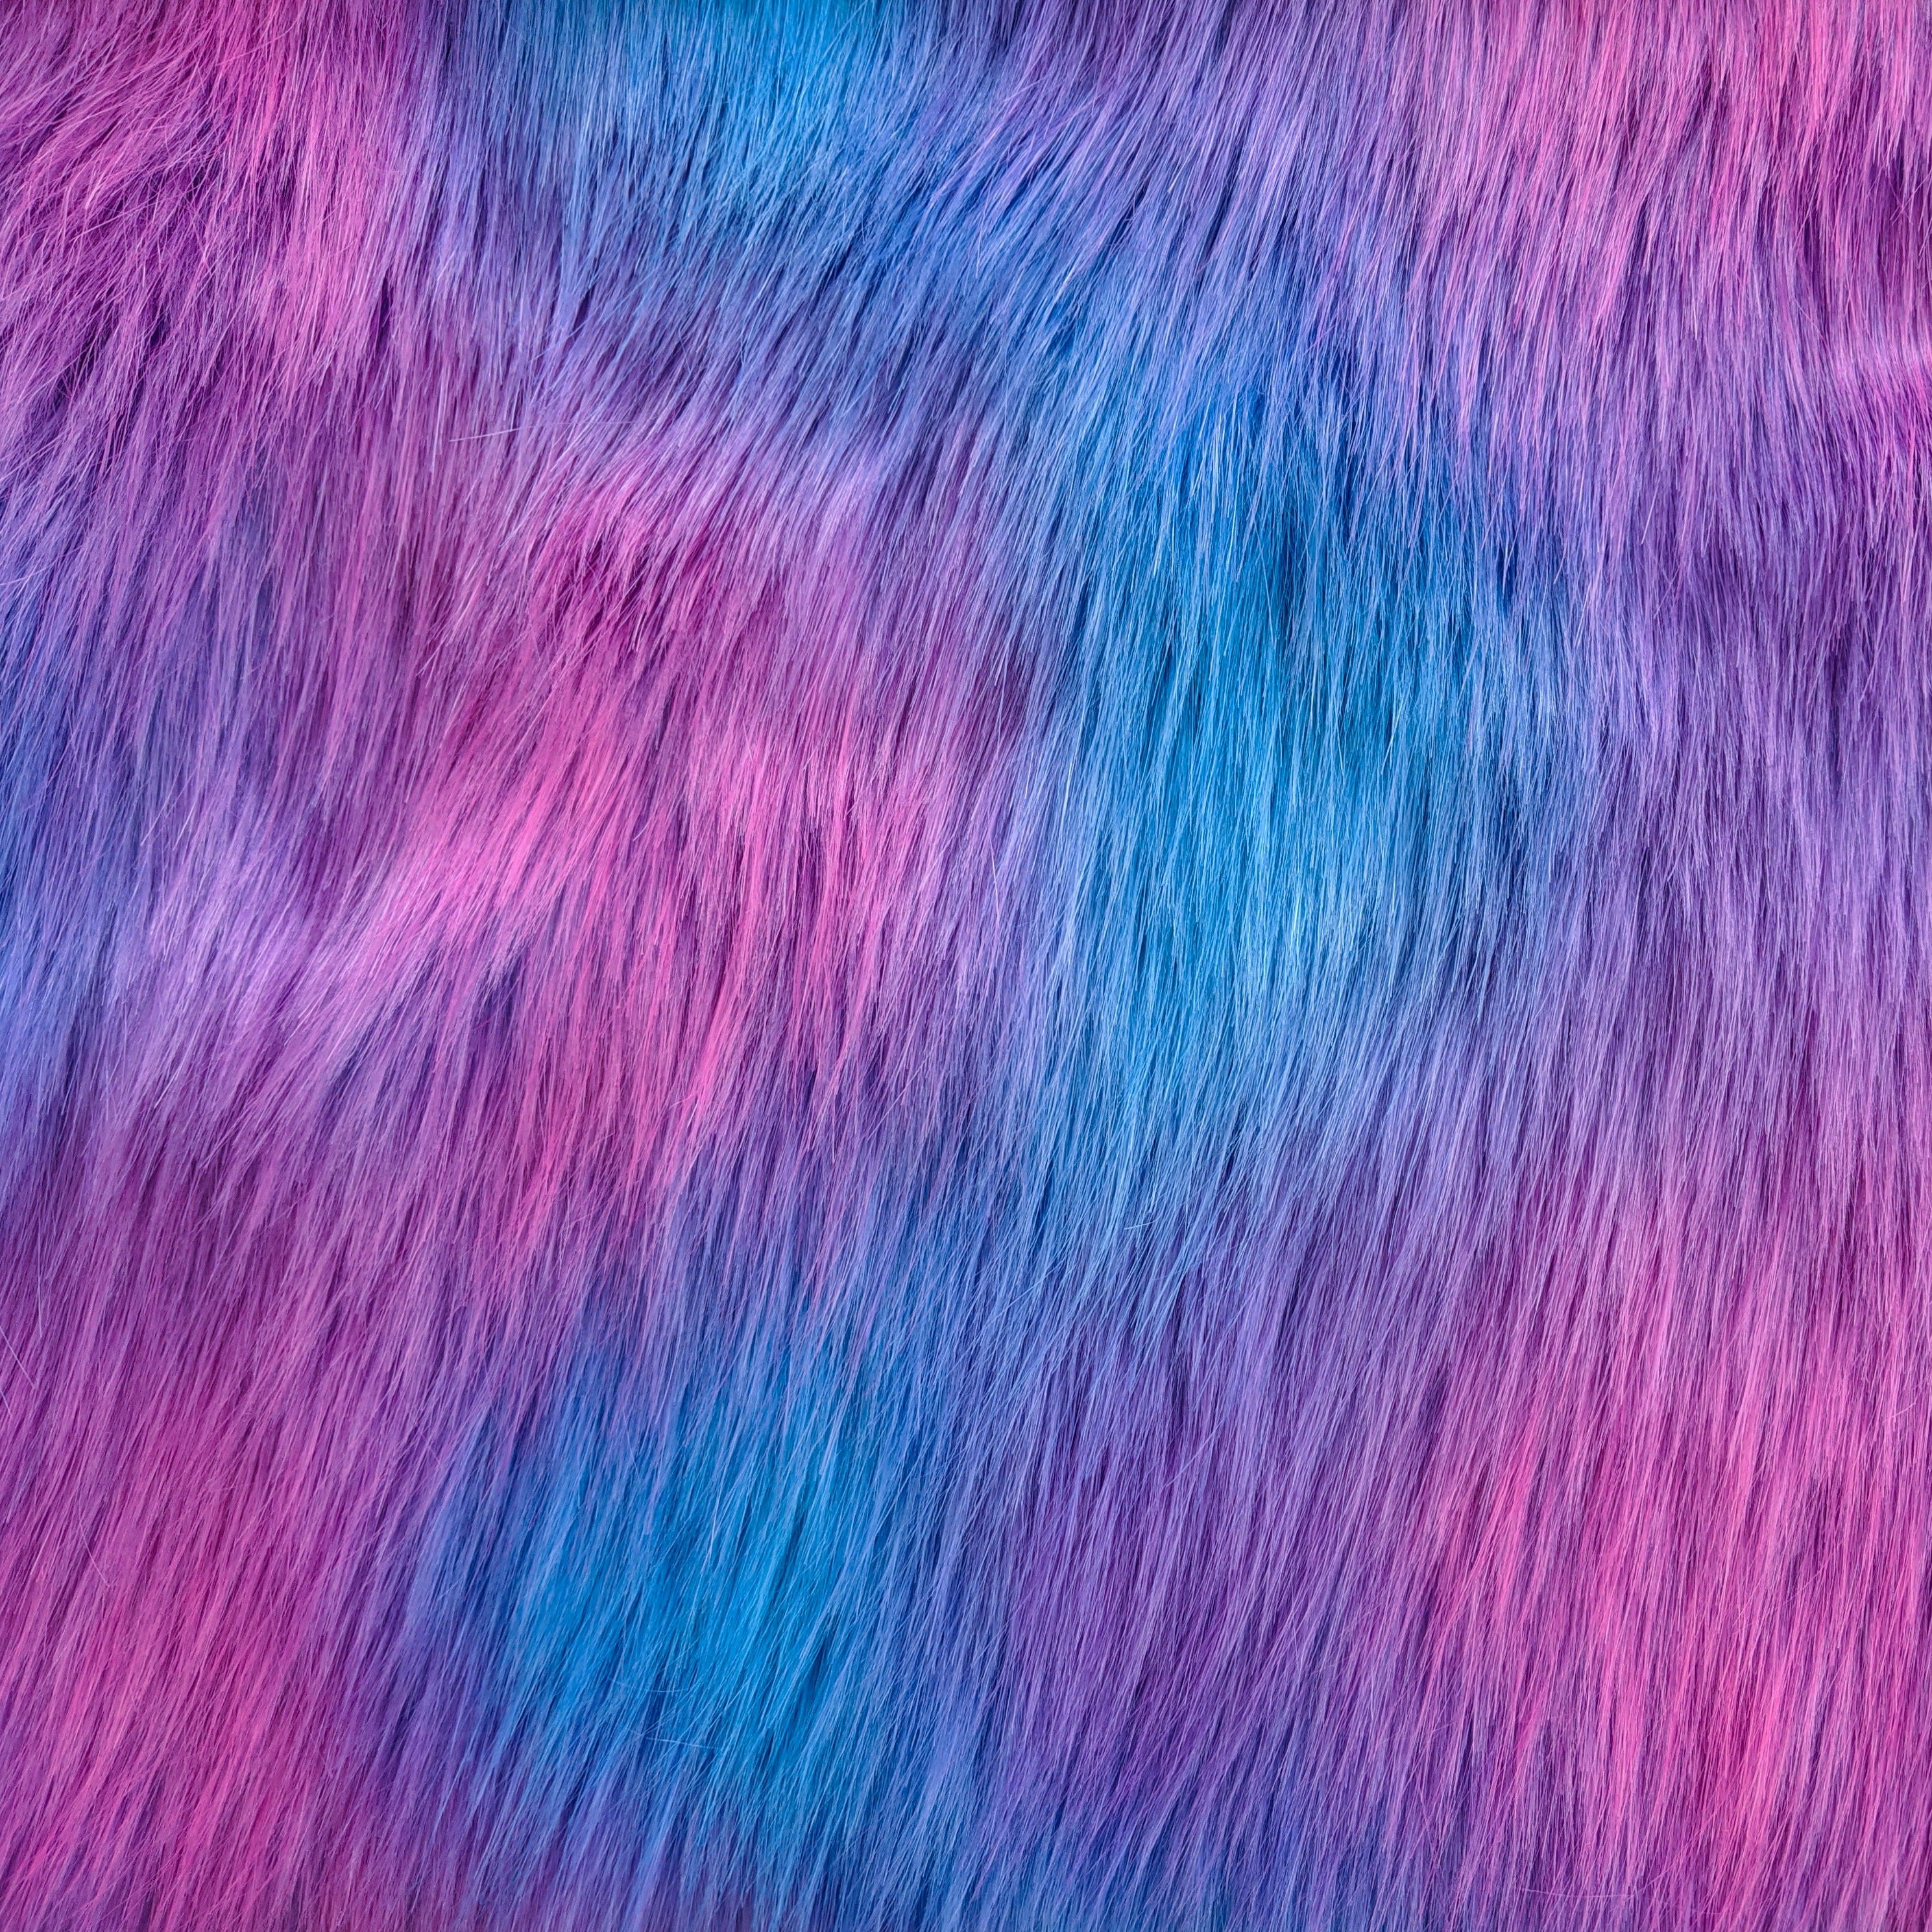 Long pile dreamsicle faux fur fabric laid flat. Dreamsicle has a light blue base with purple and pink streaks  throughout.